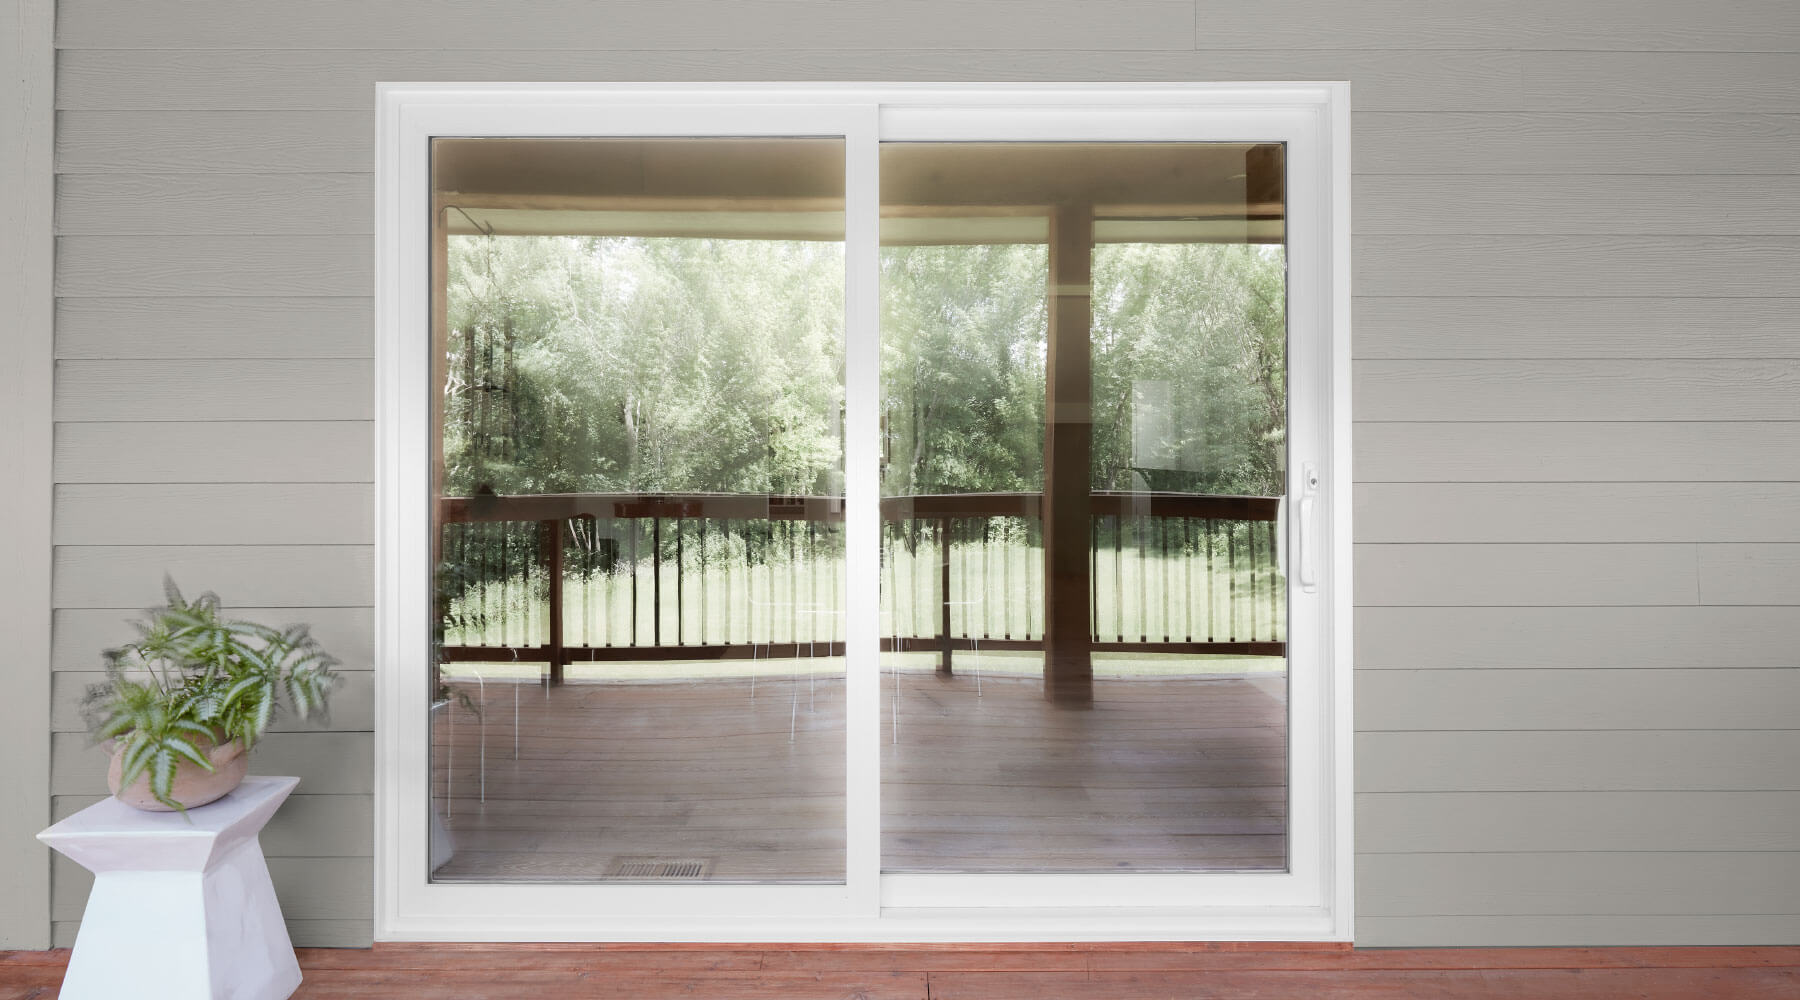 The Patio Door Replacement Process Pella, How Much Do Impact Sliding Glass Doors Cost